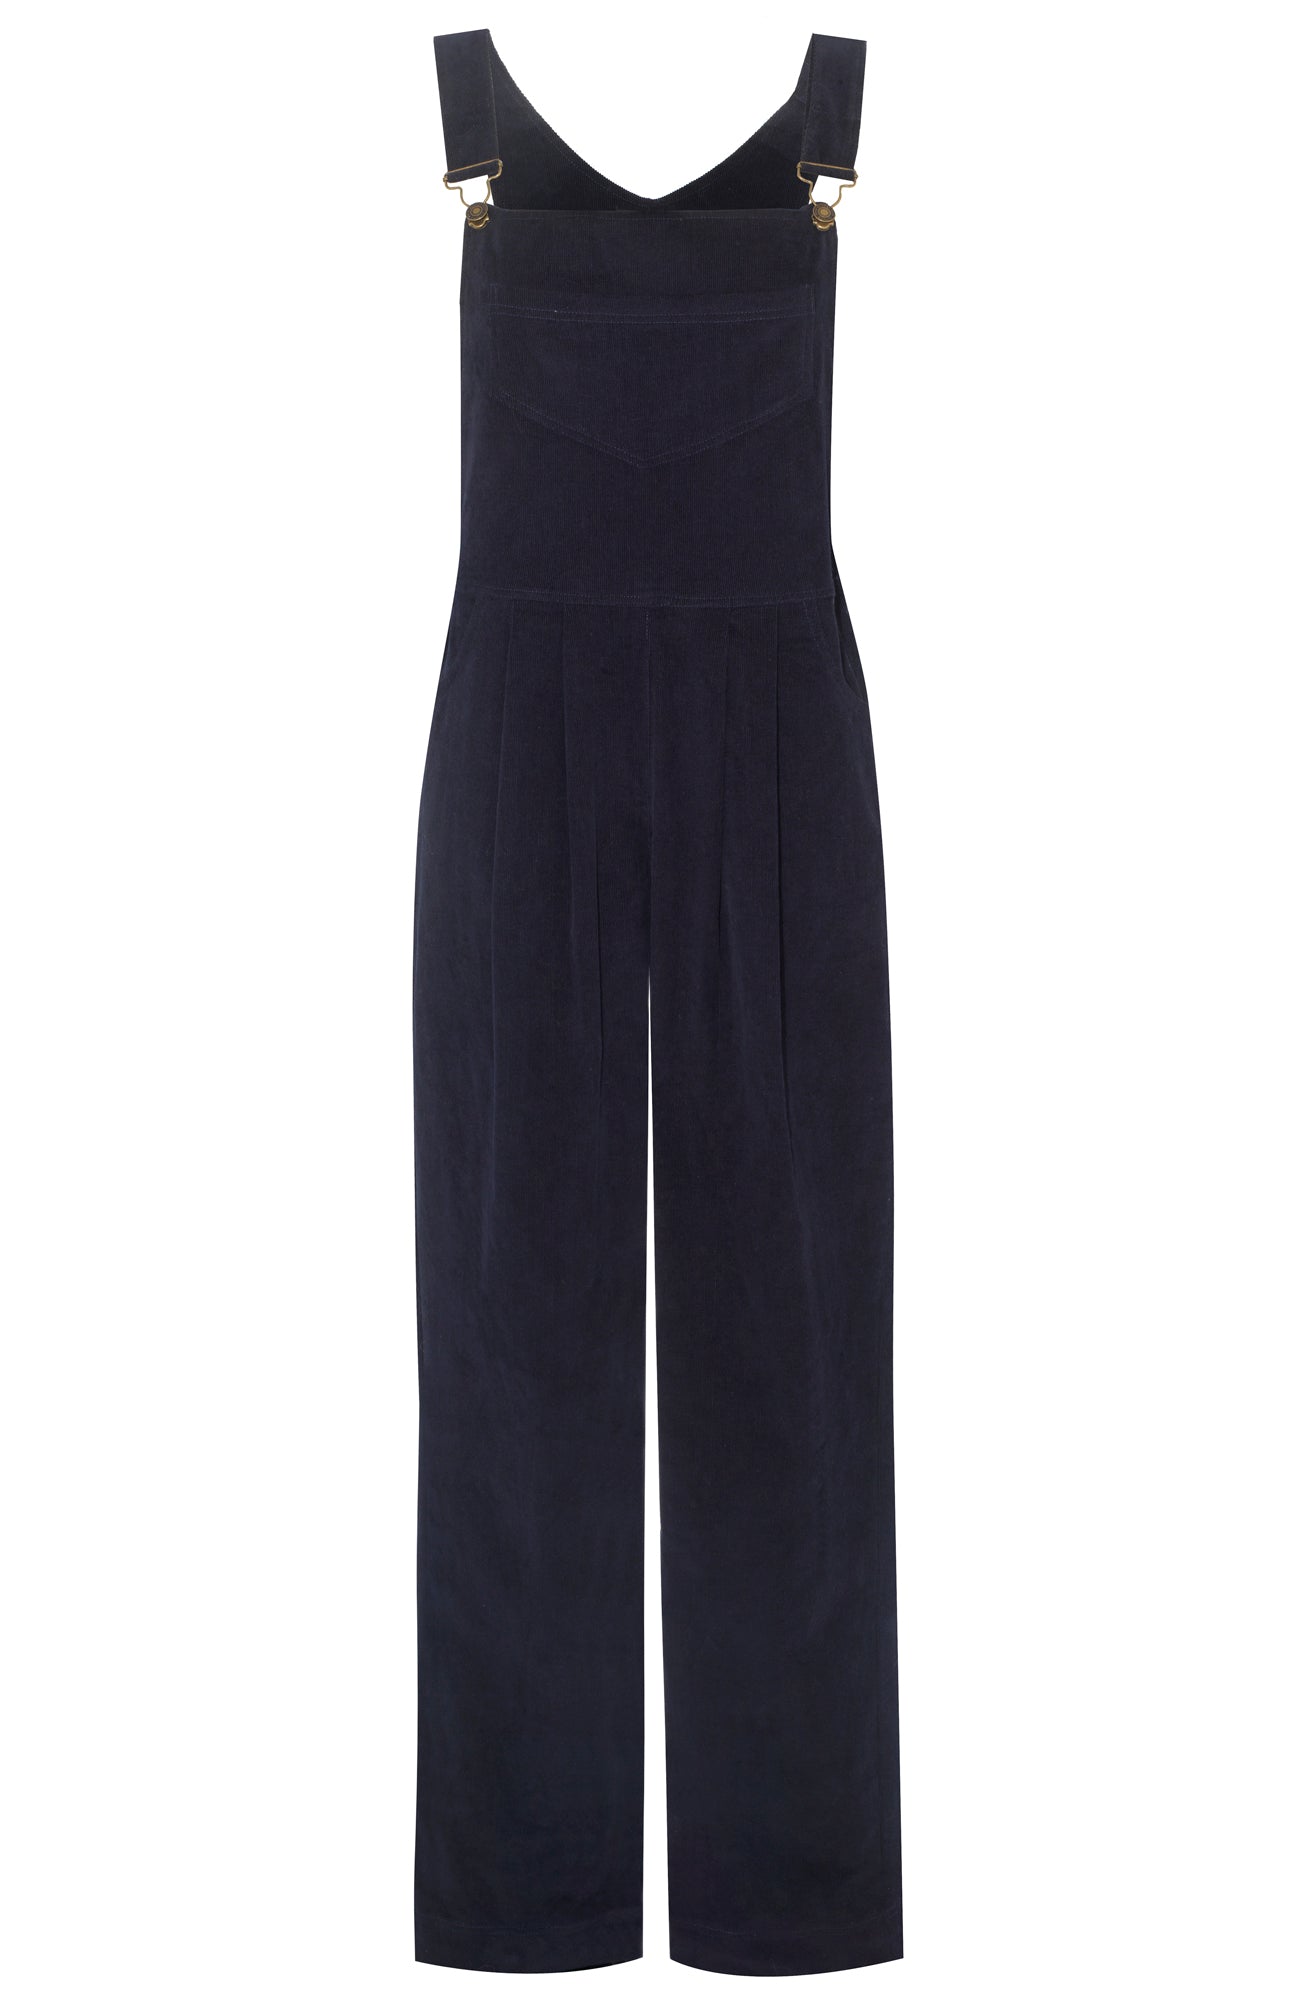 Navy Cord Dungarees - Sample! - Rock the Jumpsuit